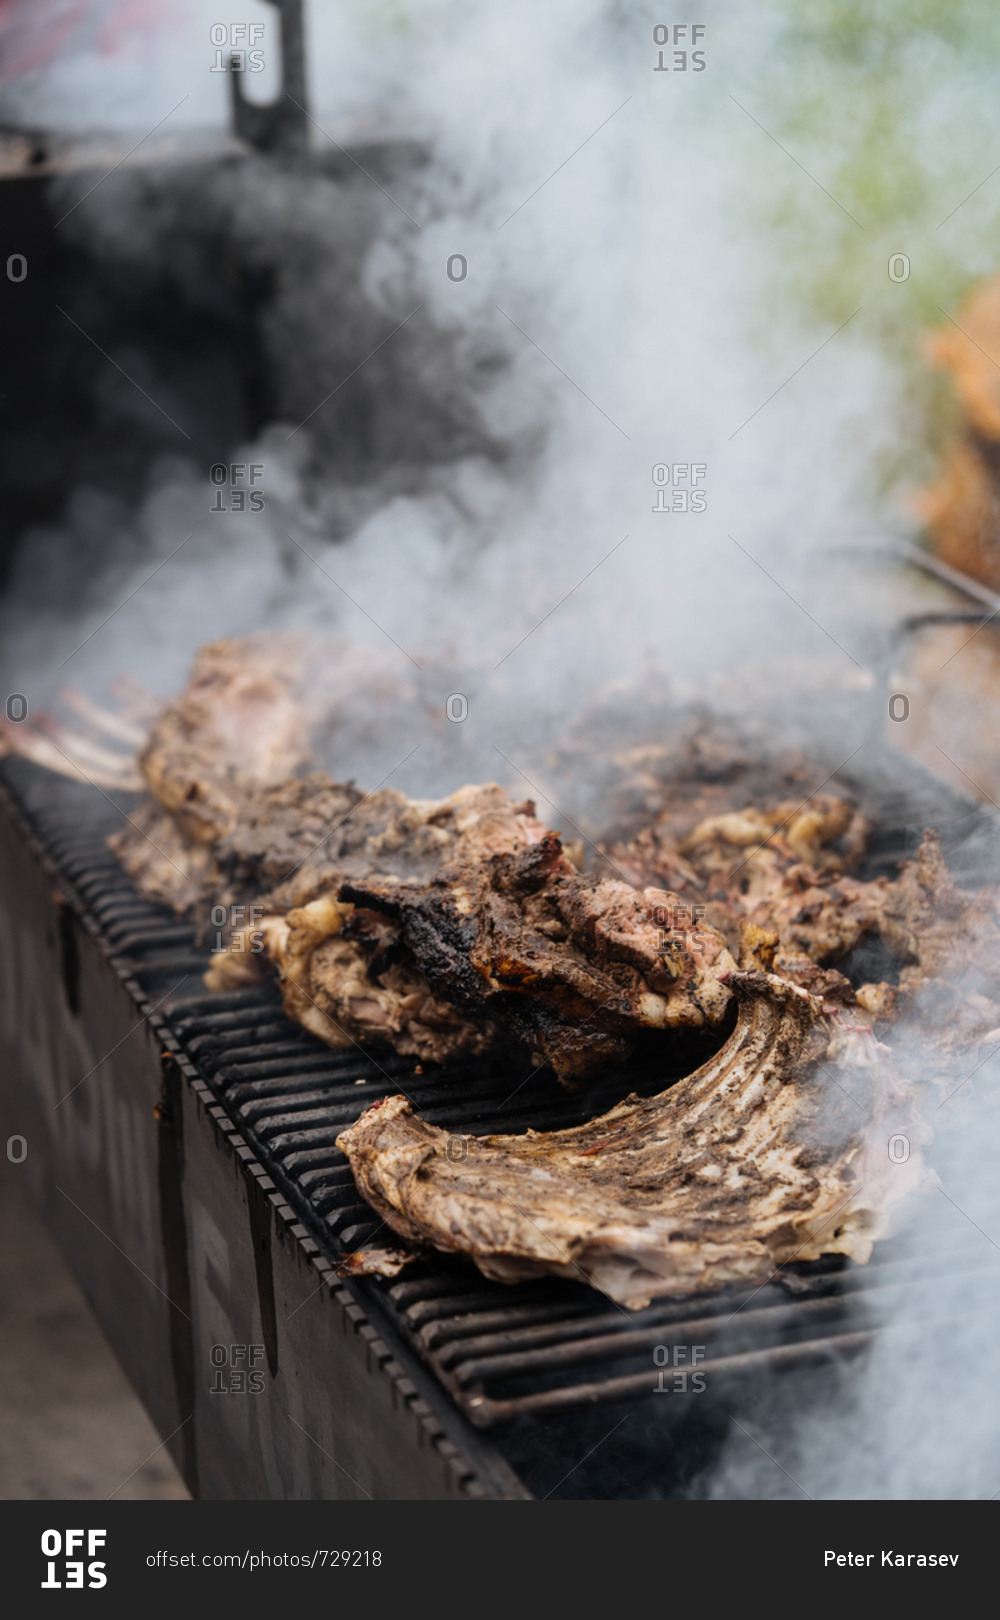 Smoking meat cooking on a grill